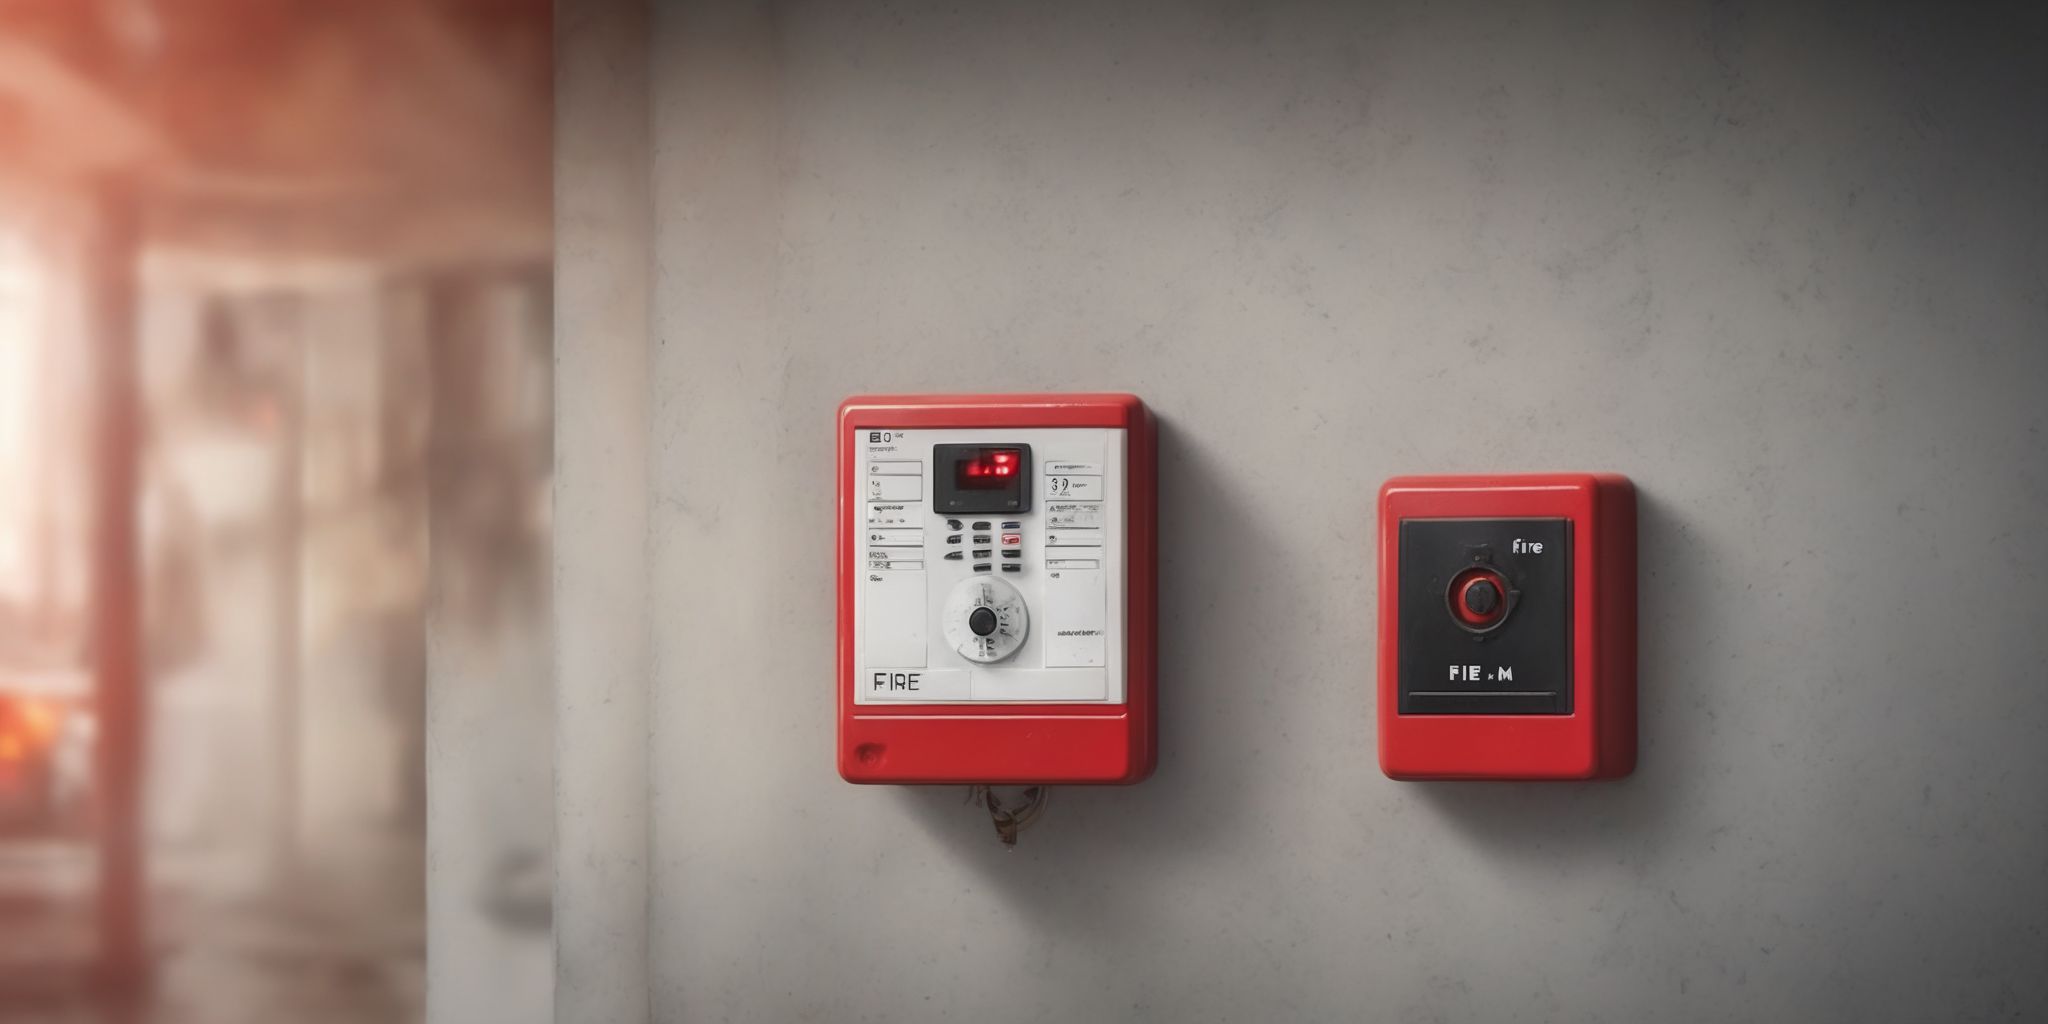 Fire alarm  in realistic, photographic style